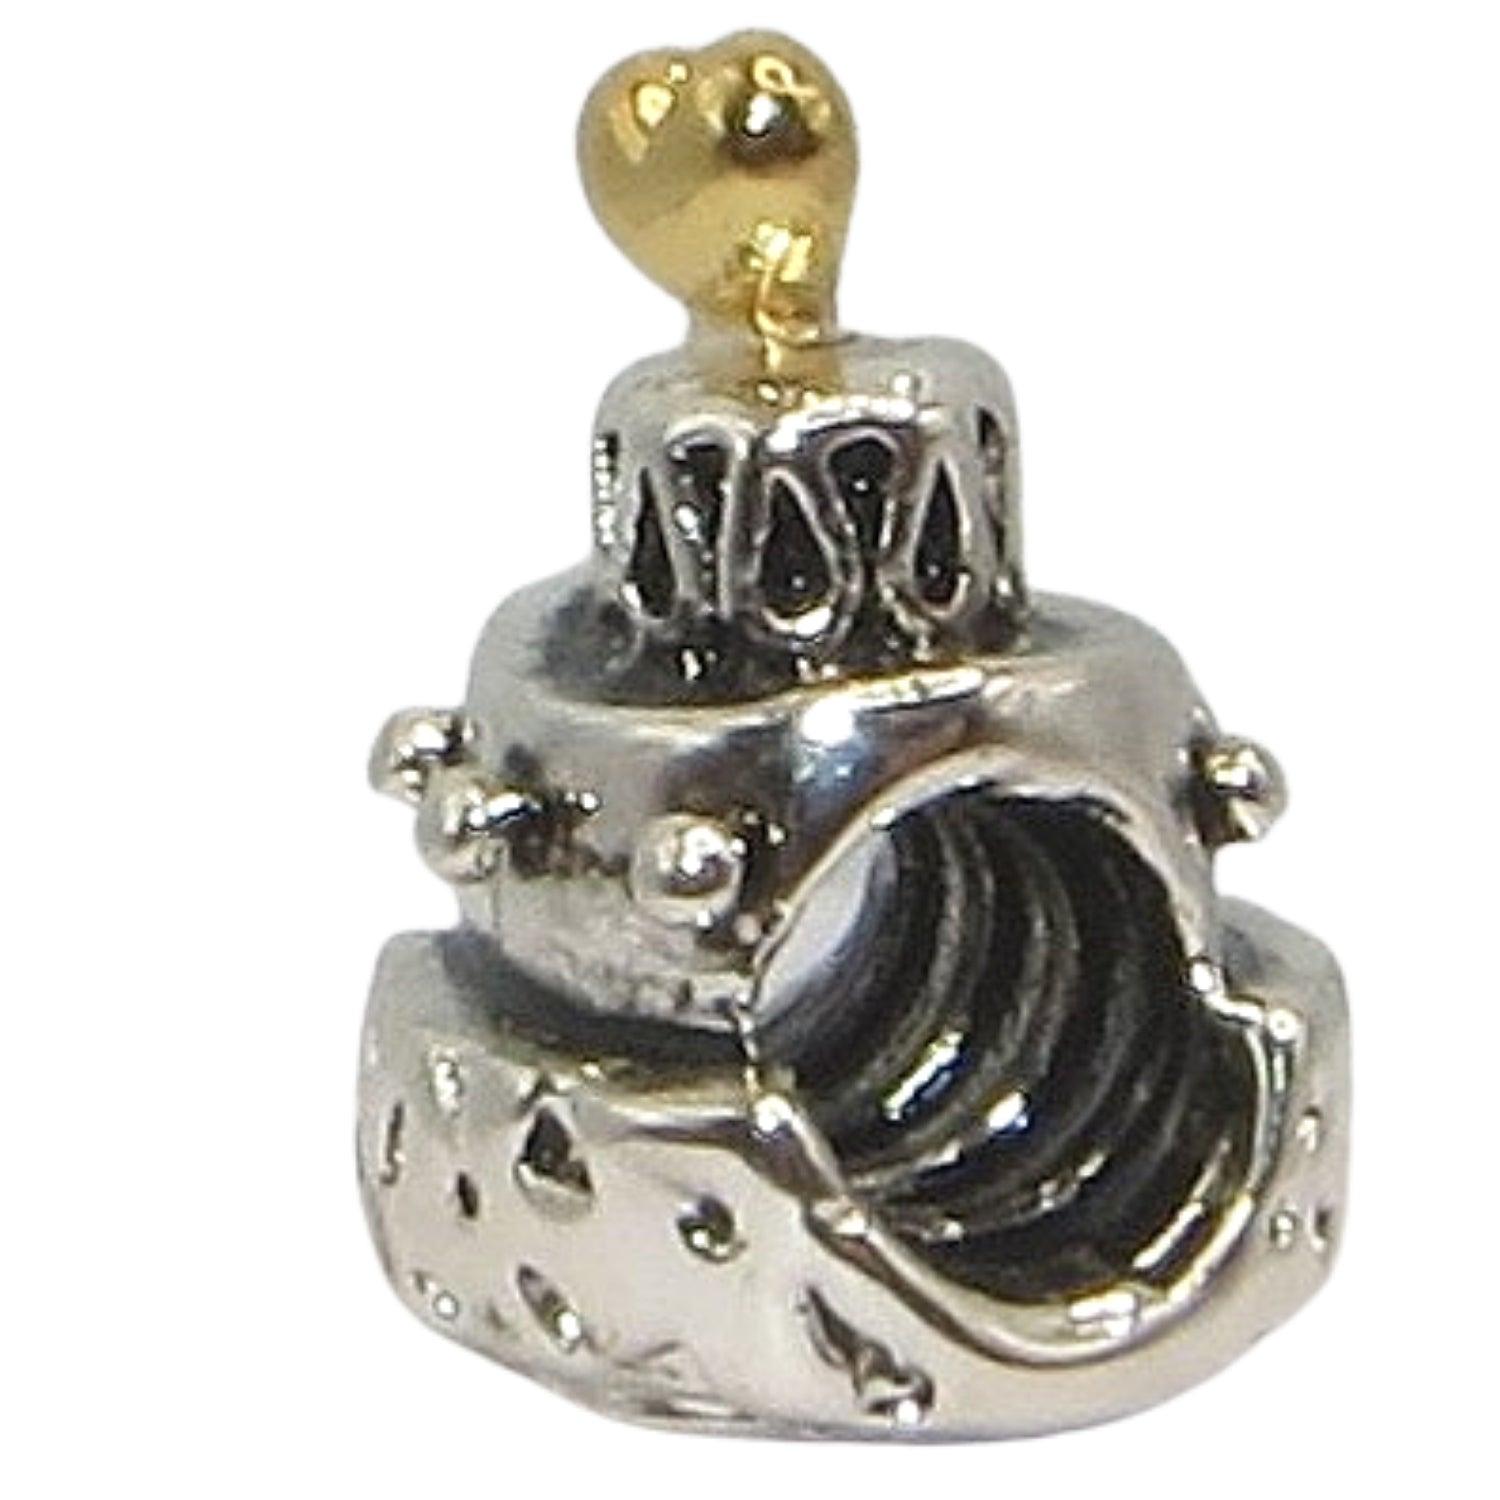 PANDORA 790347 Celebration Cake - 3-Tier Sterling Silver Cake Decorated with 14k Gold Charm